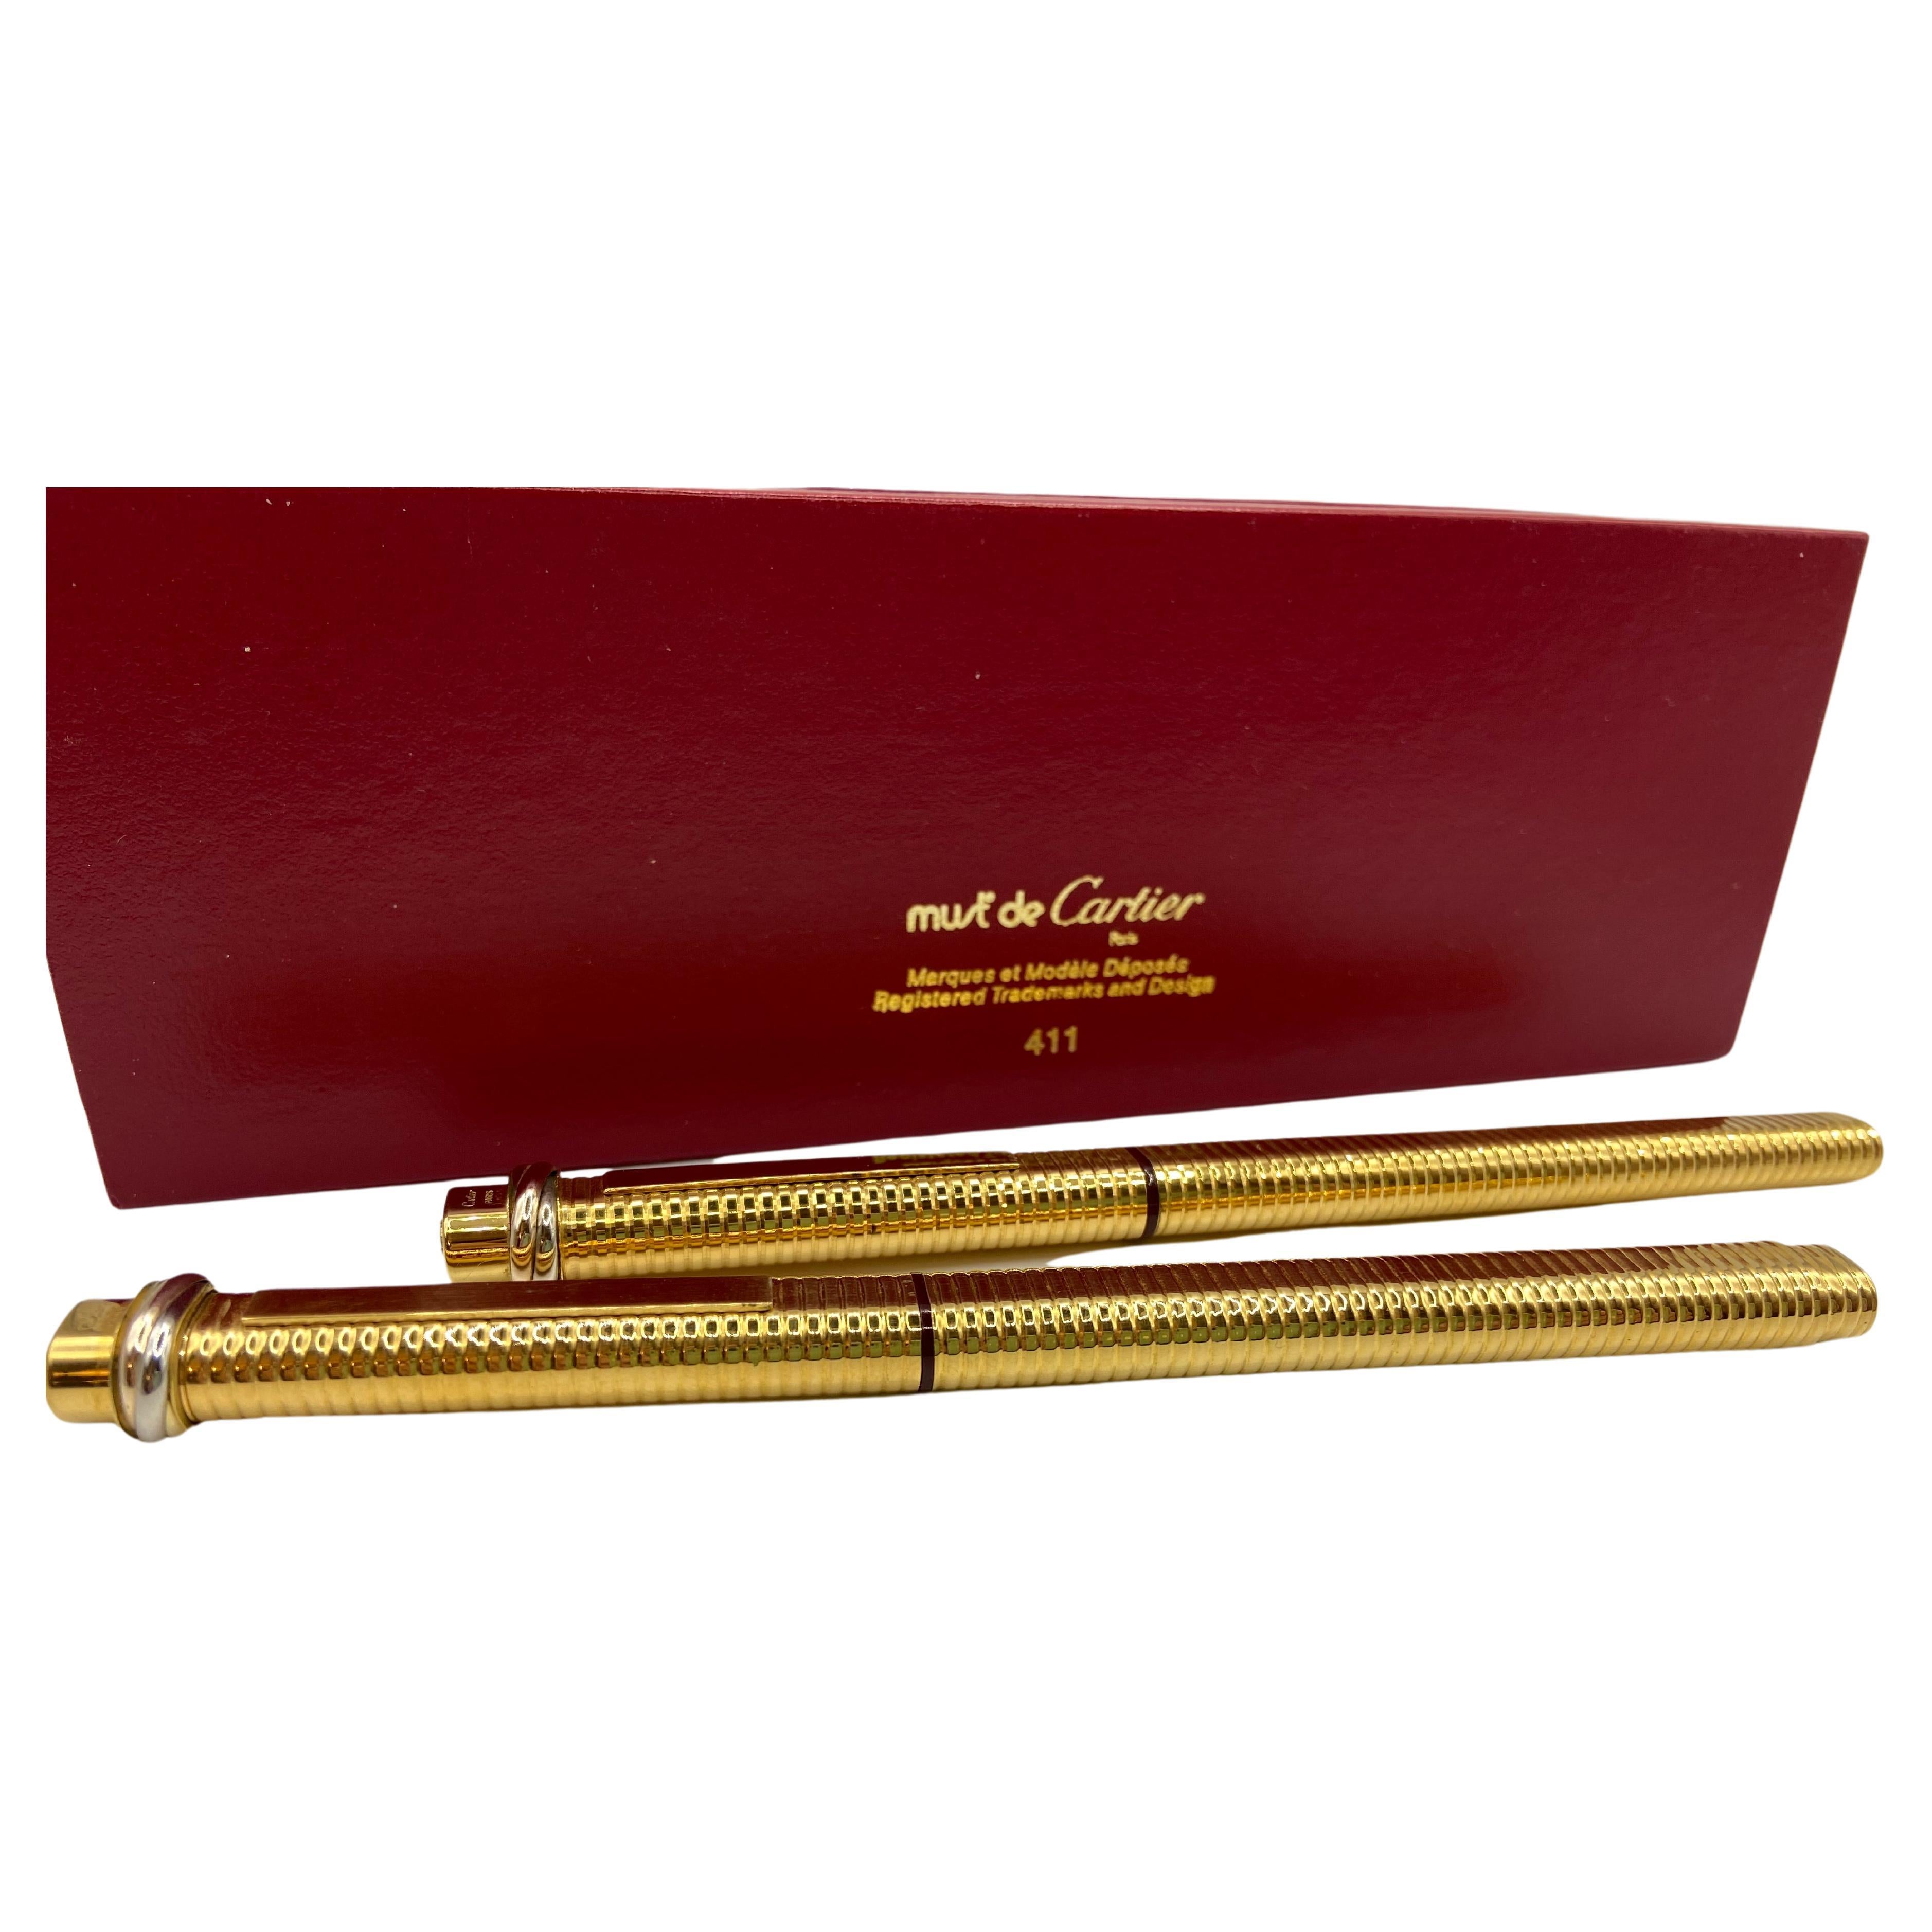 Two pens, a fountain pen and a roller, Santos model by Cartier, 18 kt gold plated.
Never used, small signs of aging. One box.The decorative band with interweaving is in white, yellow and rose gold.
It has a pocket clip which is lifted by pressing